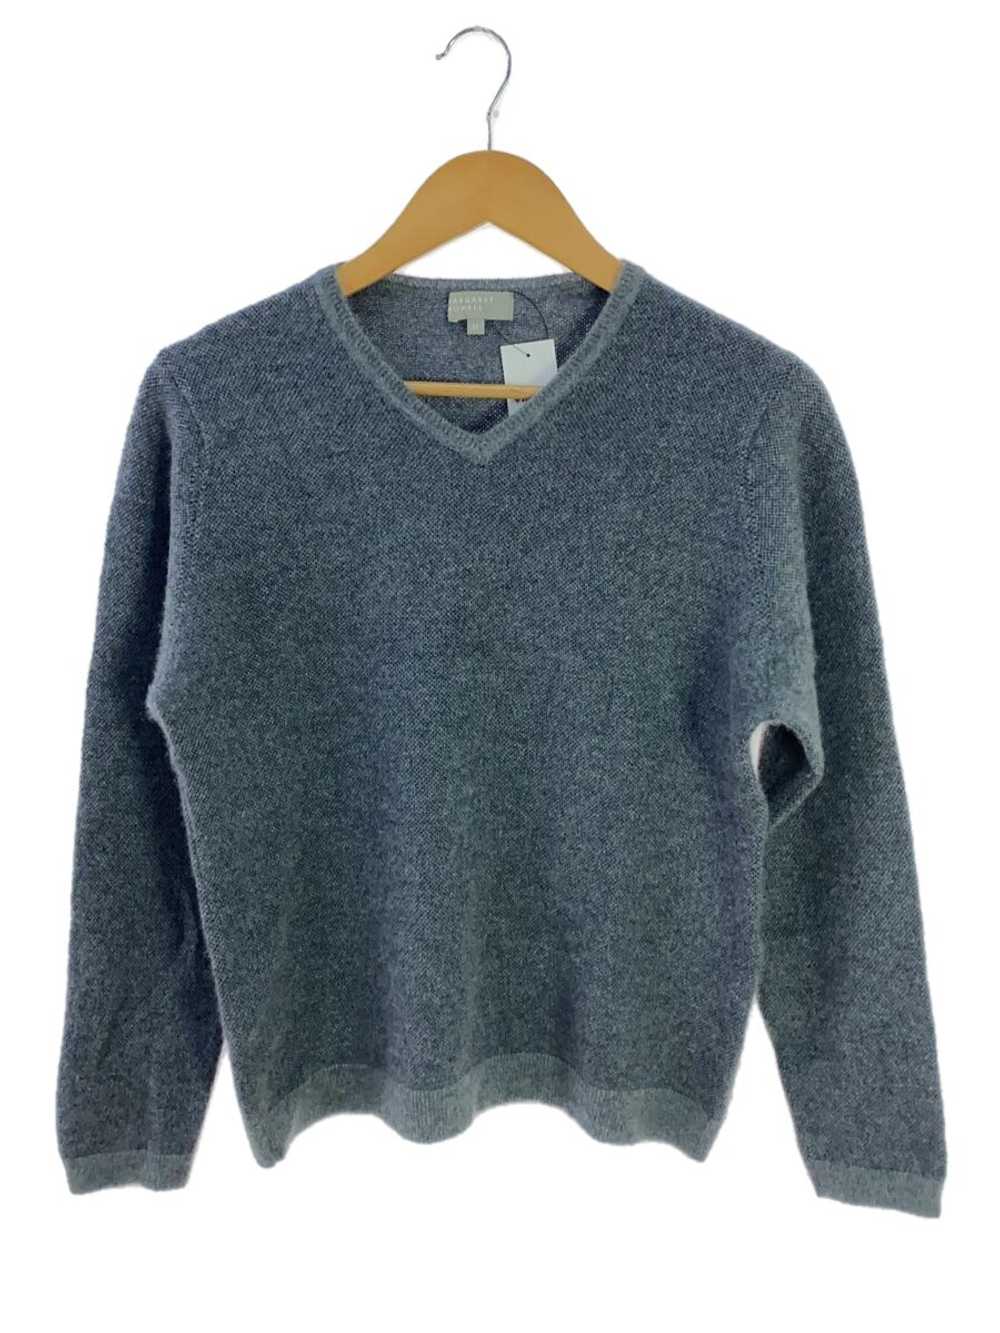 Men's Margaret Howell Sweater Thick/M/Cashmere/Gr… - image 1